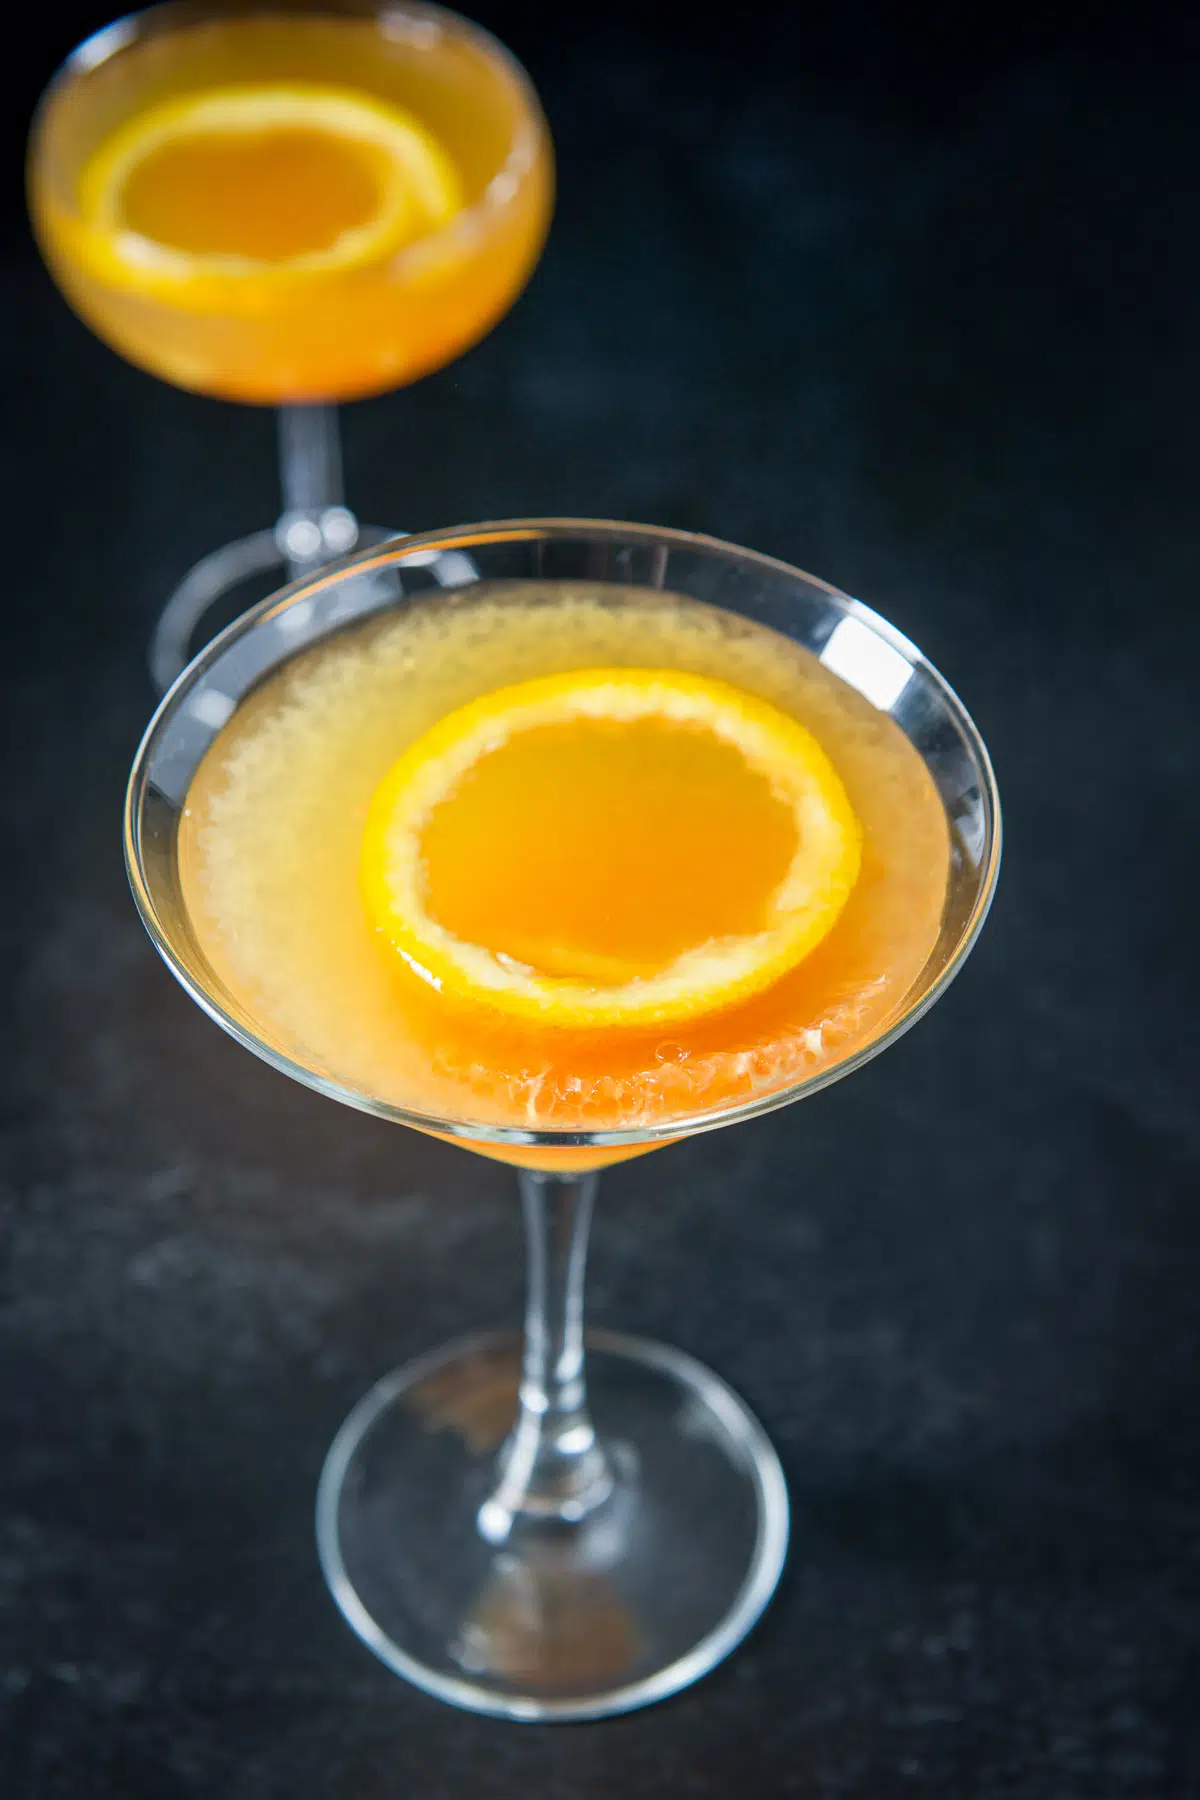 Higher view of the martini glass filled with the Bronx drink with the orange rind garnish